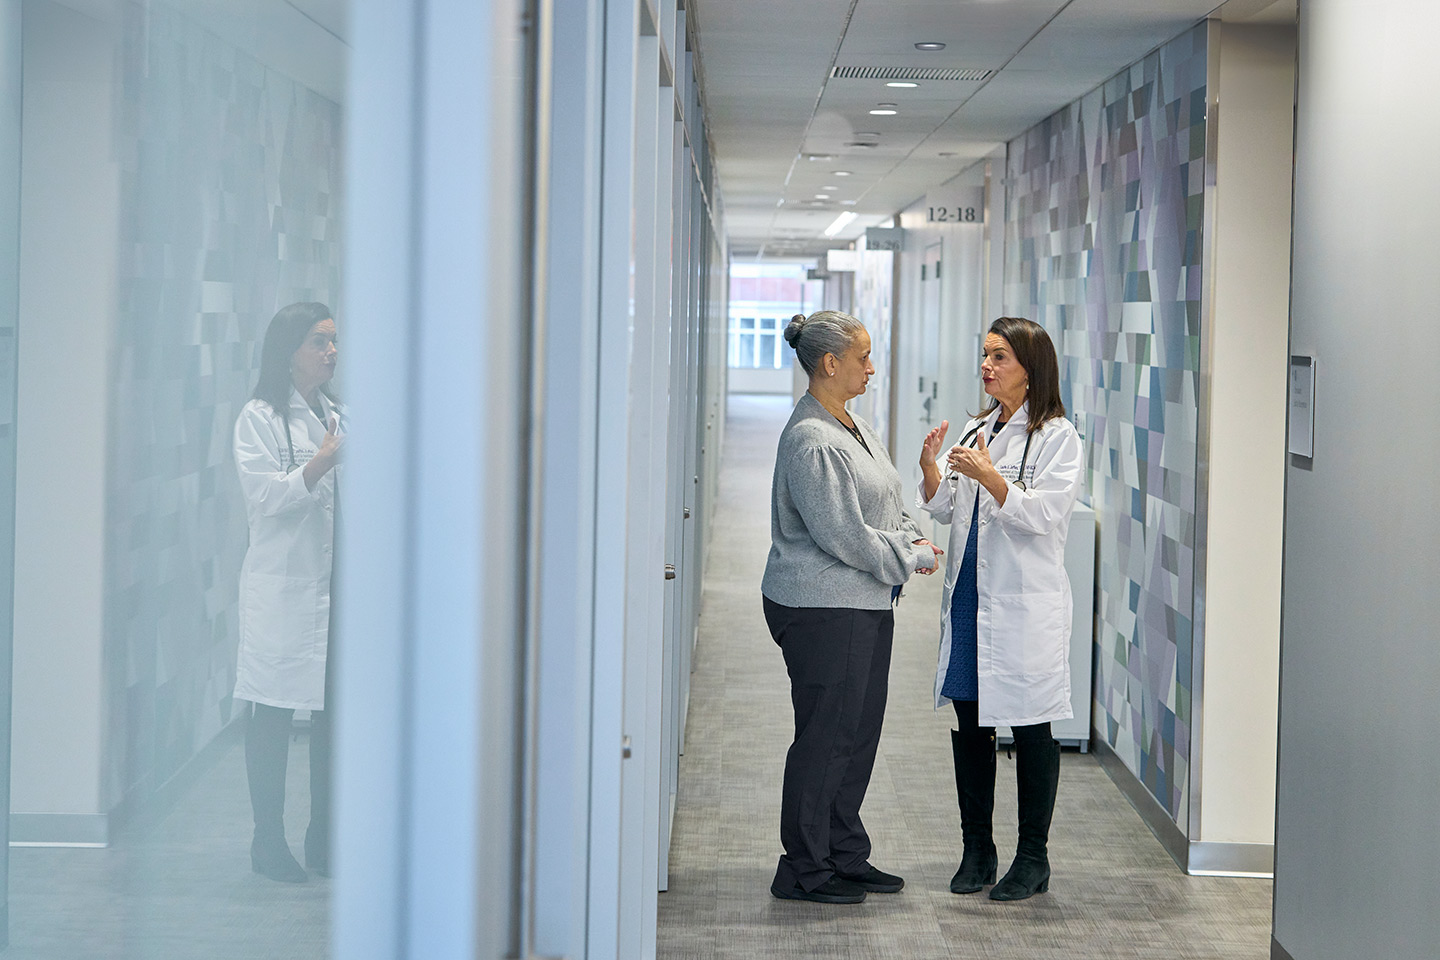 Nurse Practitioner Laurie Jeffers Talks With a Patient in a Hallway